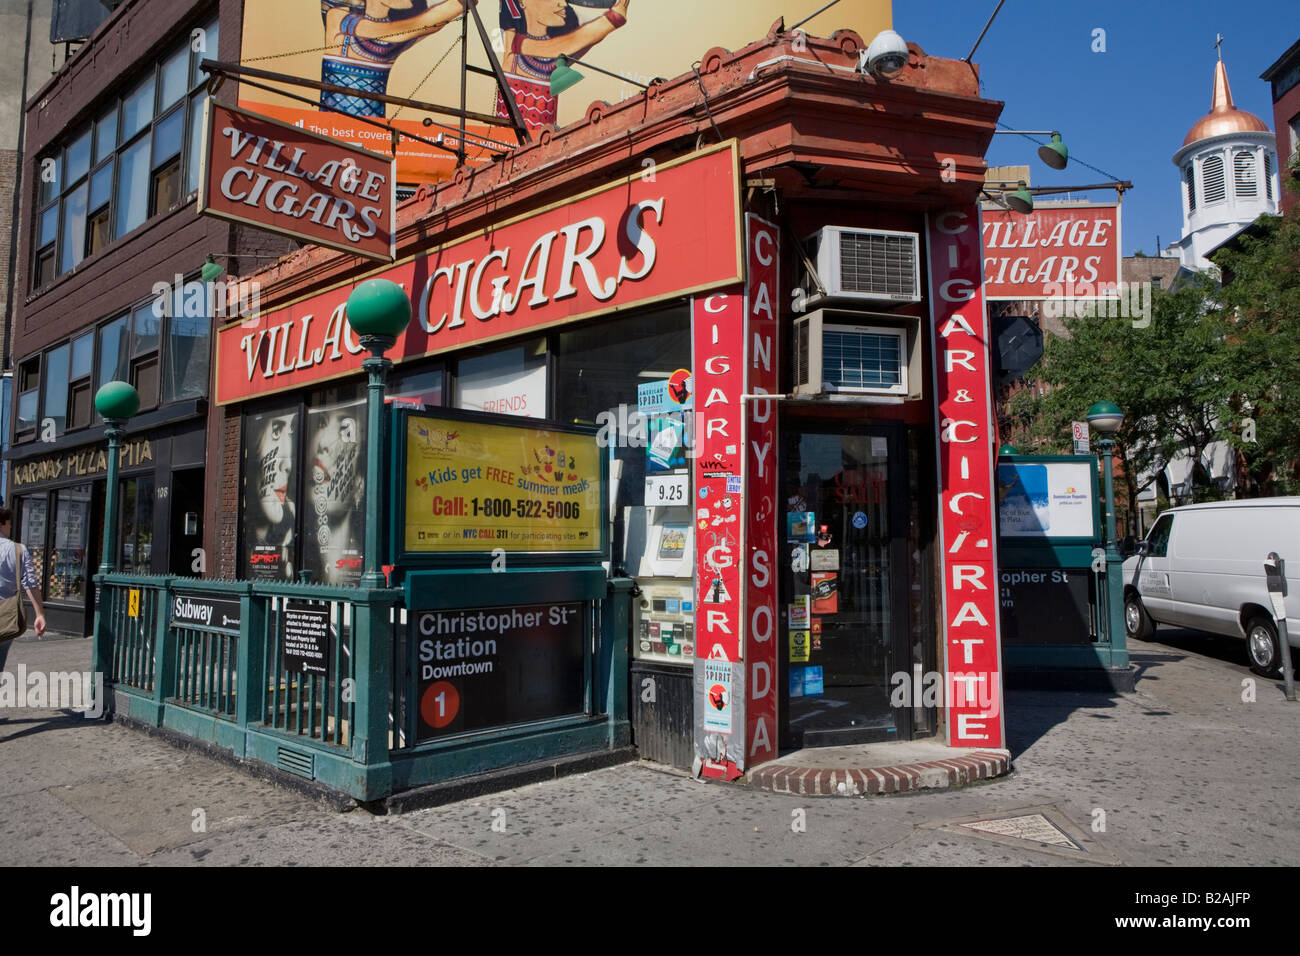 Village Cigars, a landmark adjacent to Sheridan Square for almost 100 years, West Village, New York City Stock Photo